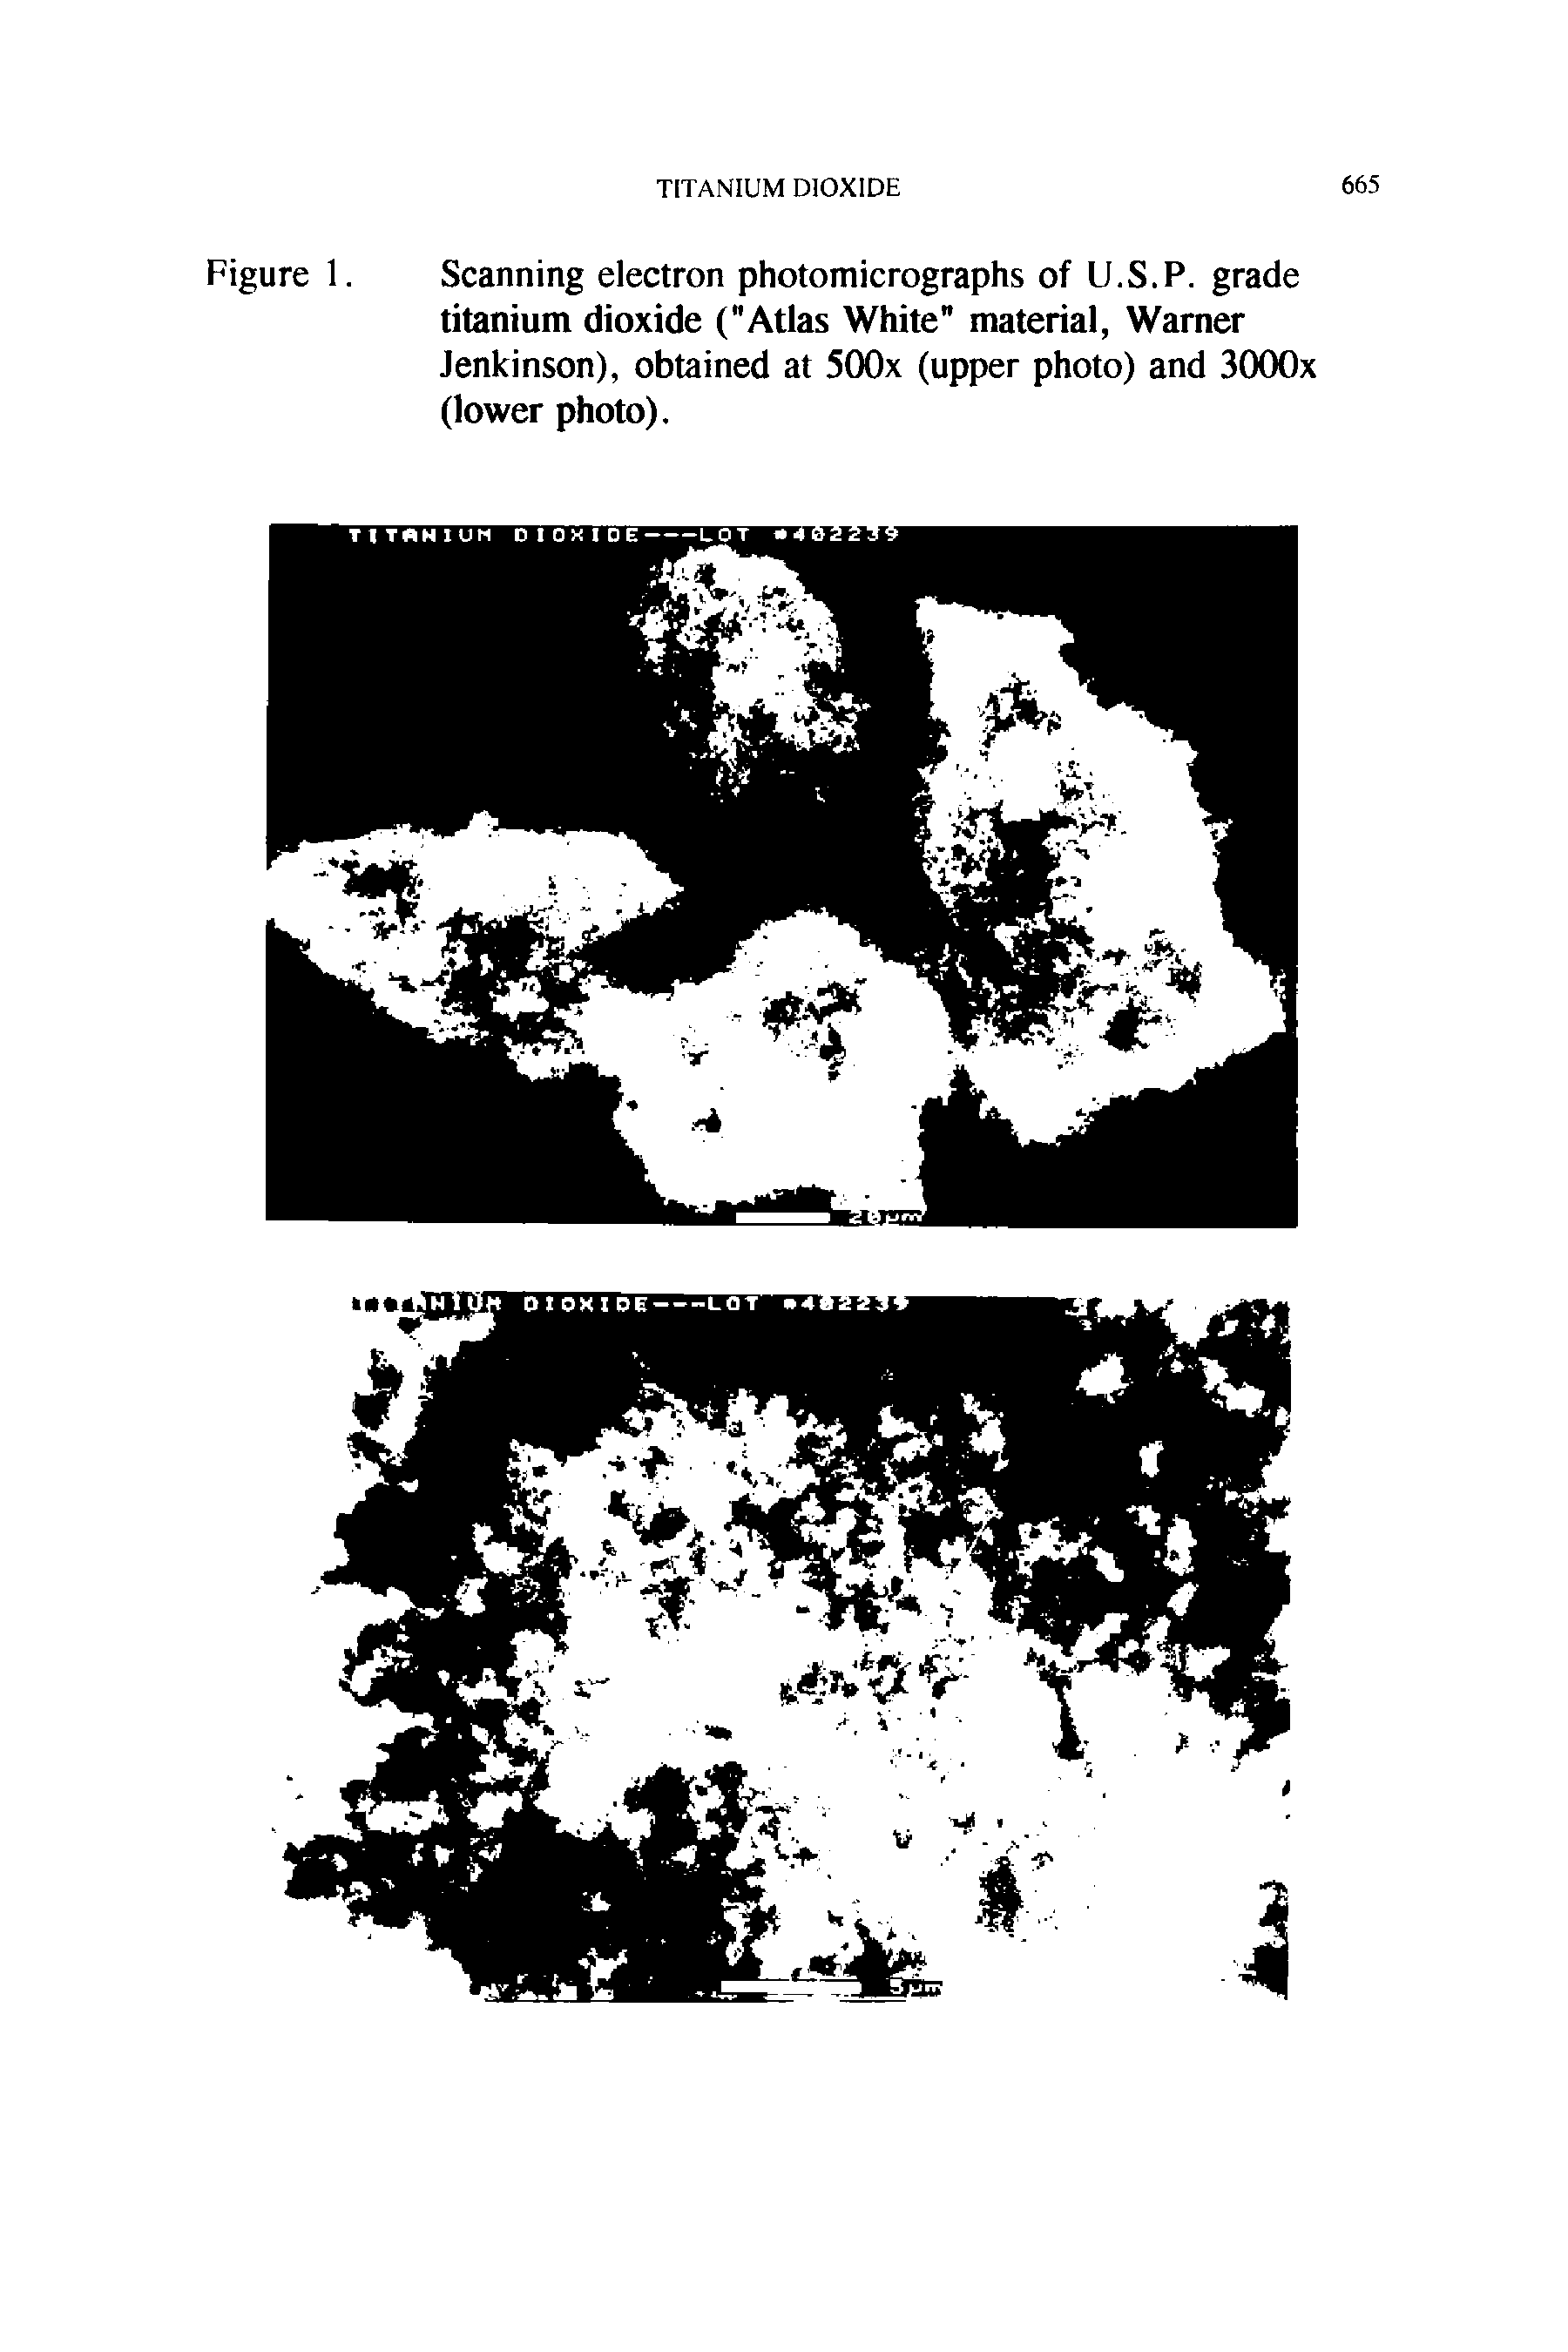 Figure 1. Scanning electron photomicrographs of U.S.P. grade titanium dioxide ("Atlas White" material, Warner Jenkinson), obtained at 5(X)x (upper photo) and 3000x (lower photo).